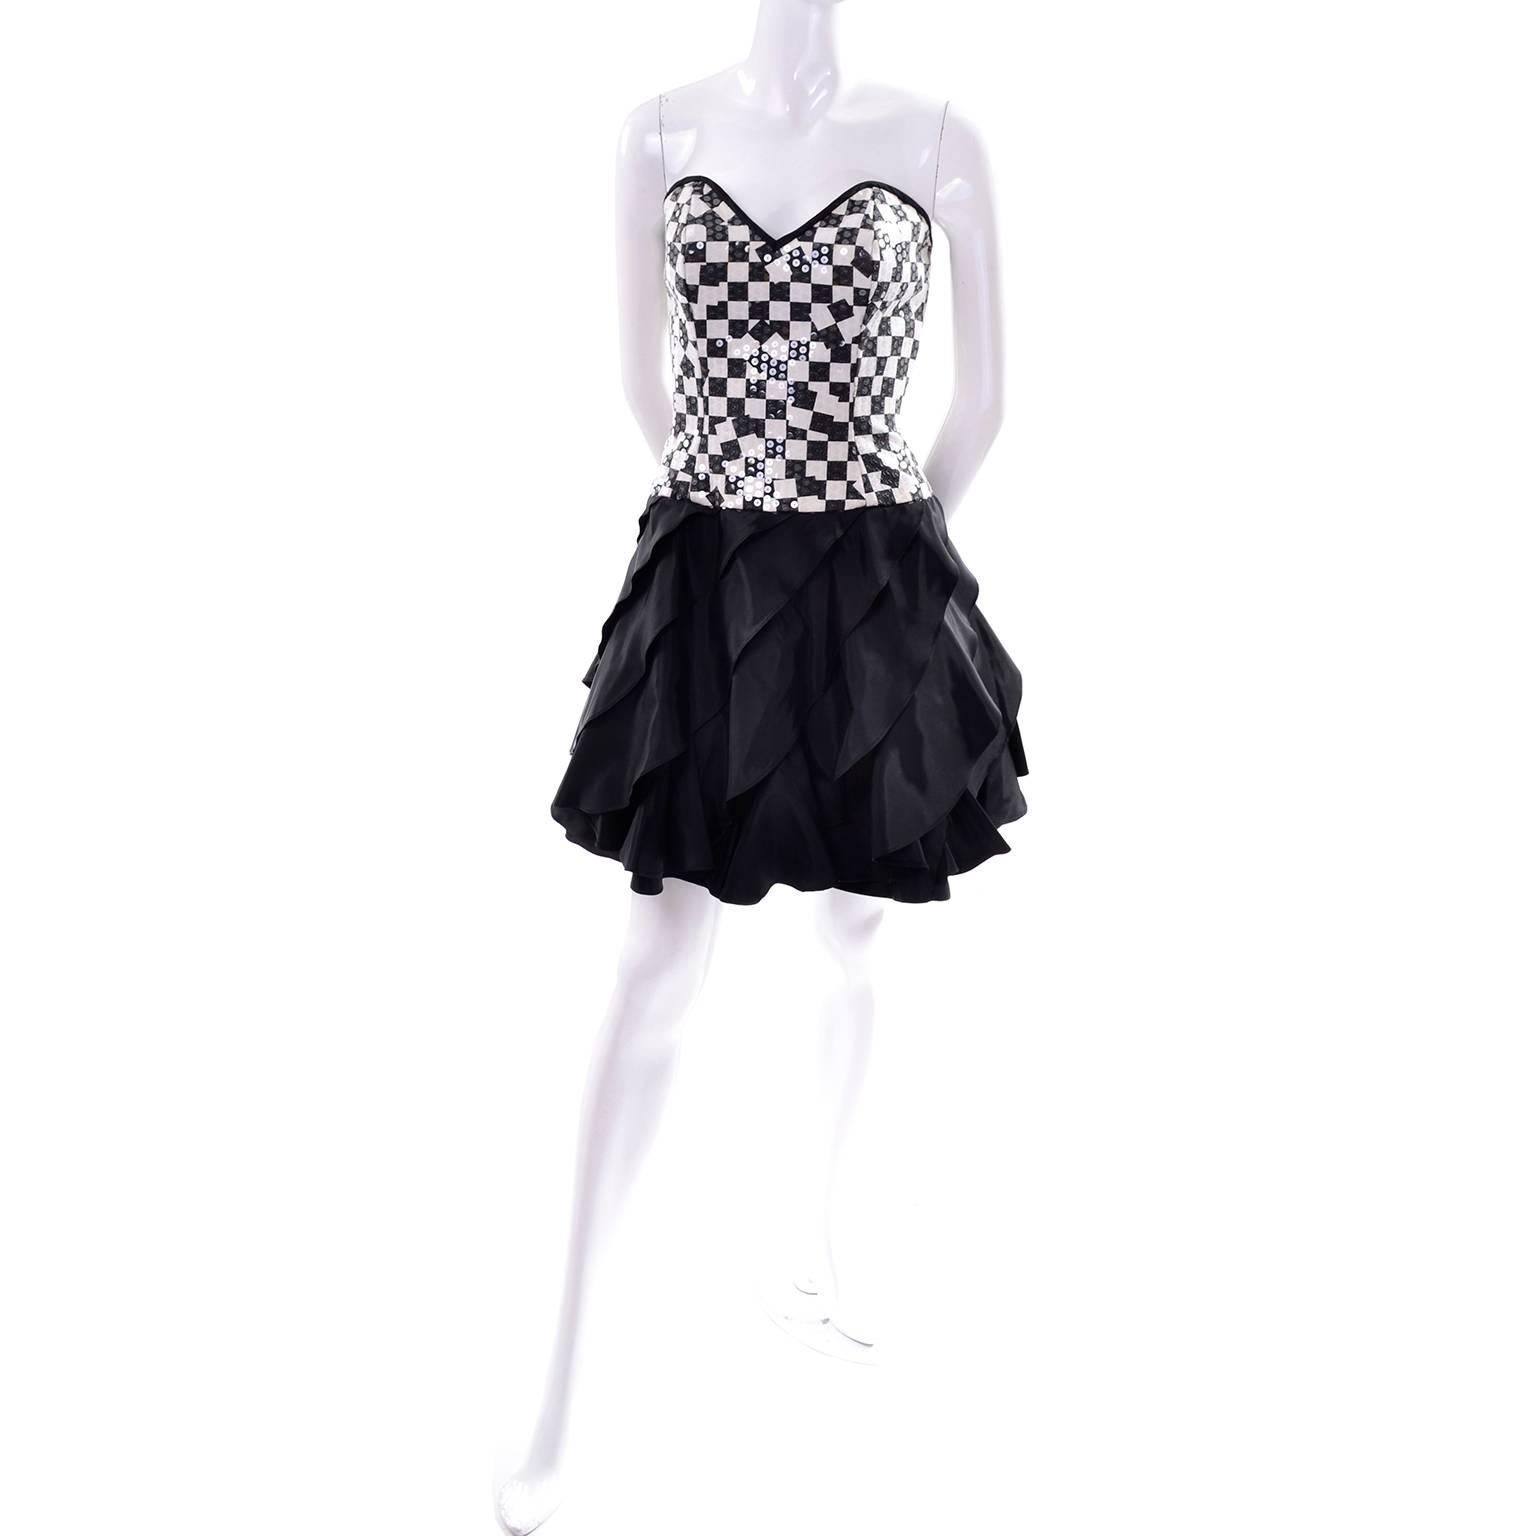 This amazing vintage Lillie Rubin party dress is from the 1980's and has a cotton black and ivory checked bodice that is covered with clear and pale ivory sequins.  The dress has stays in the bodice, a tiered ruffled taffeta skirt and a zipper up